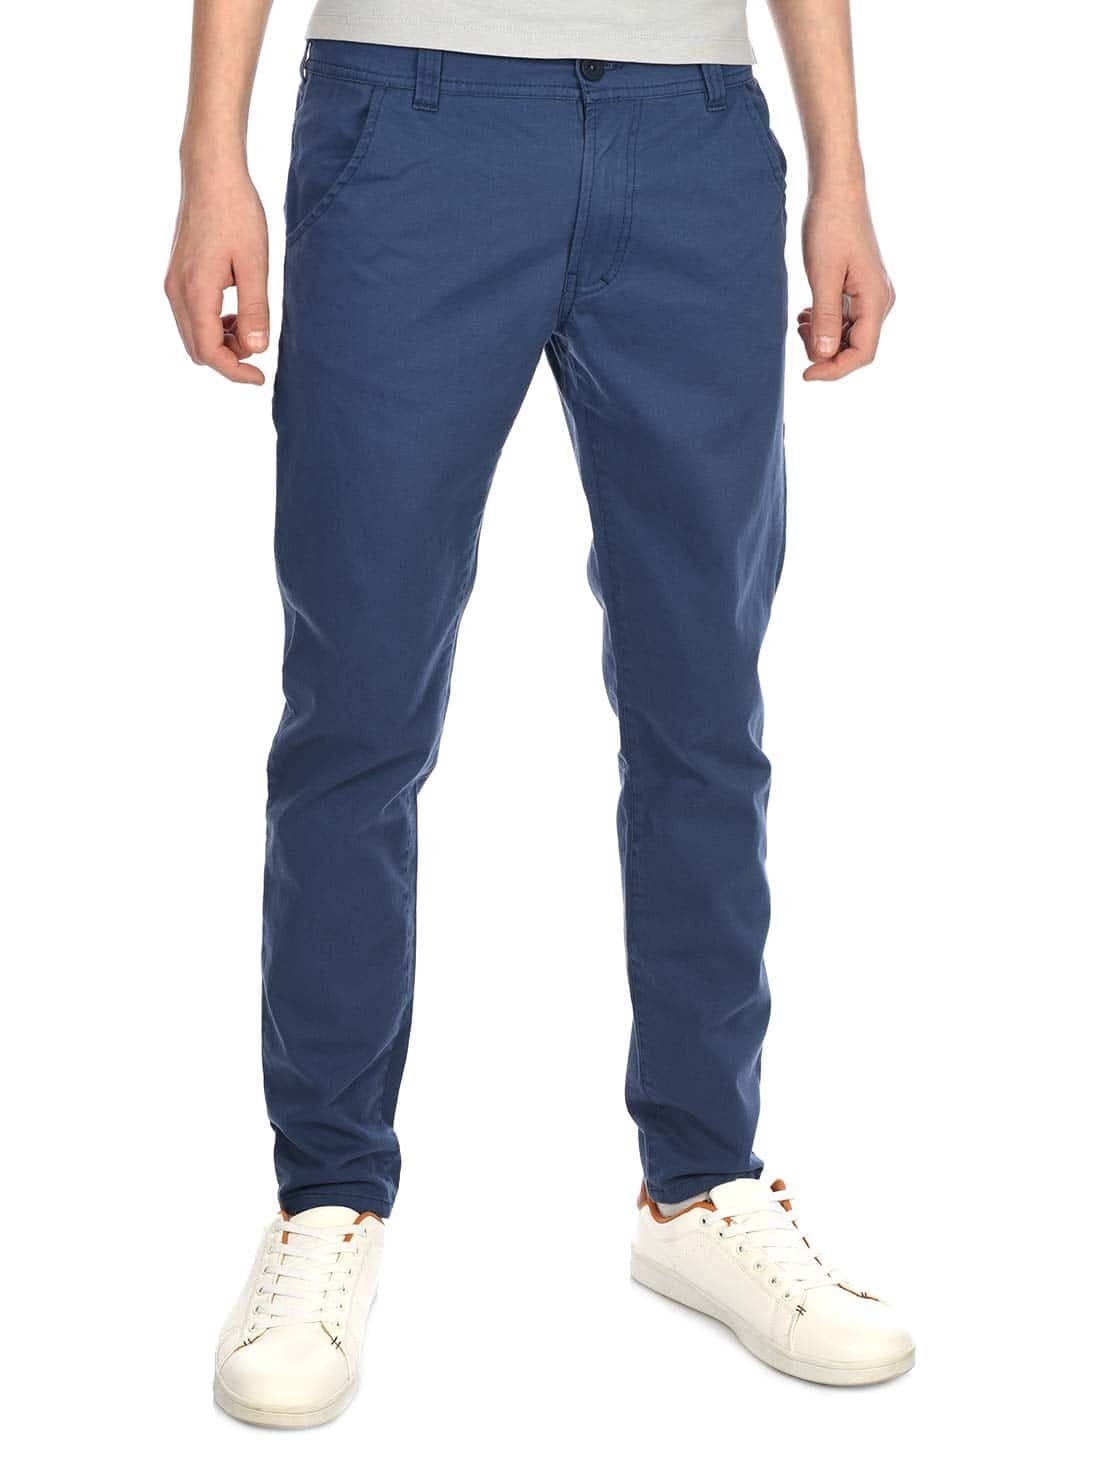 Jeansblau Chino Chinohose casual Hose Jungen BEZLIT (1-tlg)